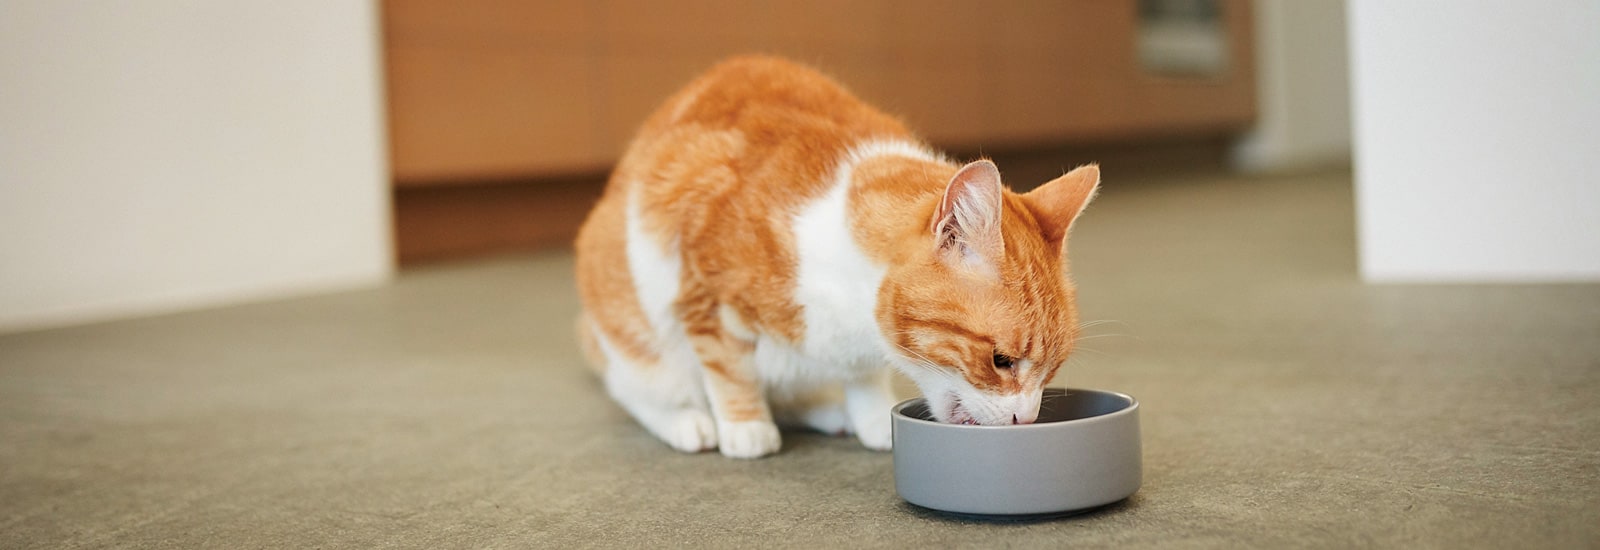 Feeding your cat - nutrition tips